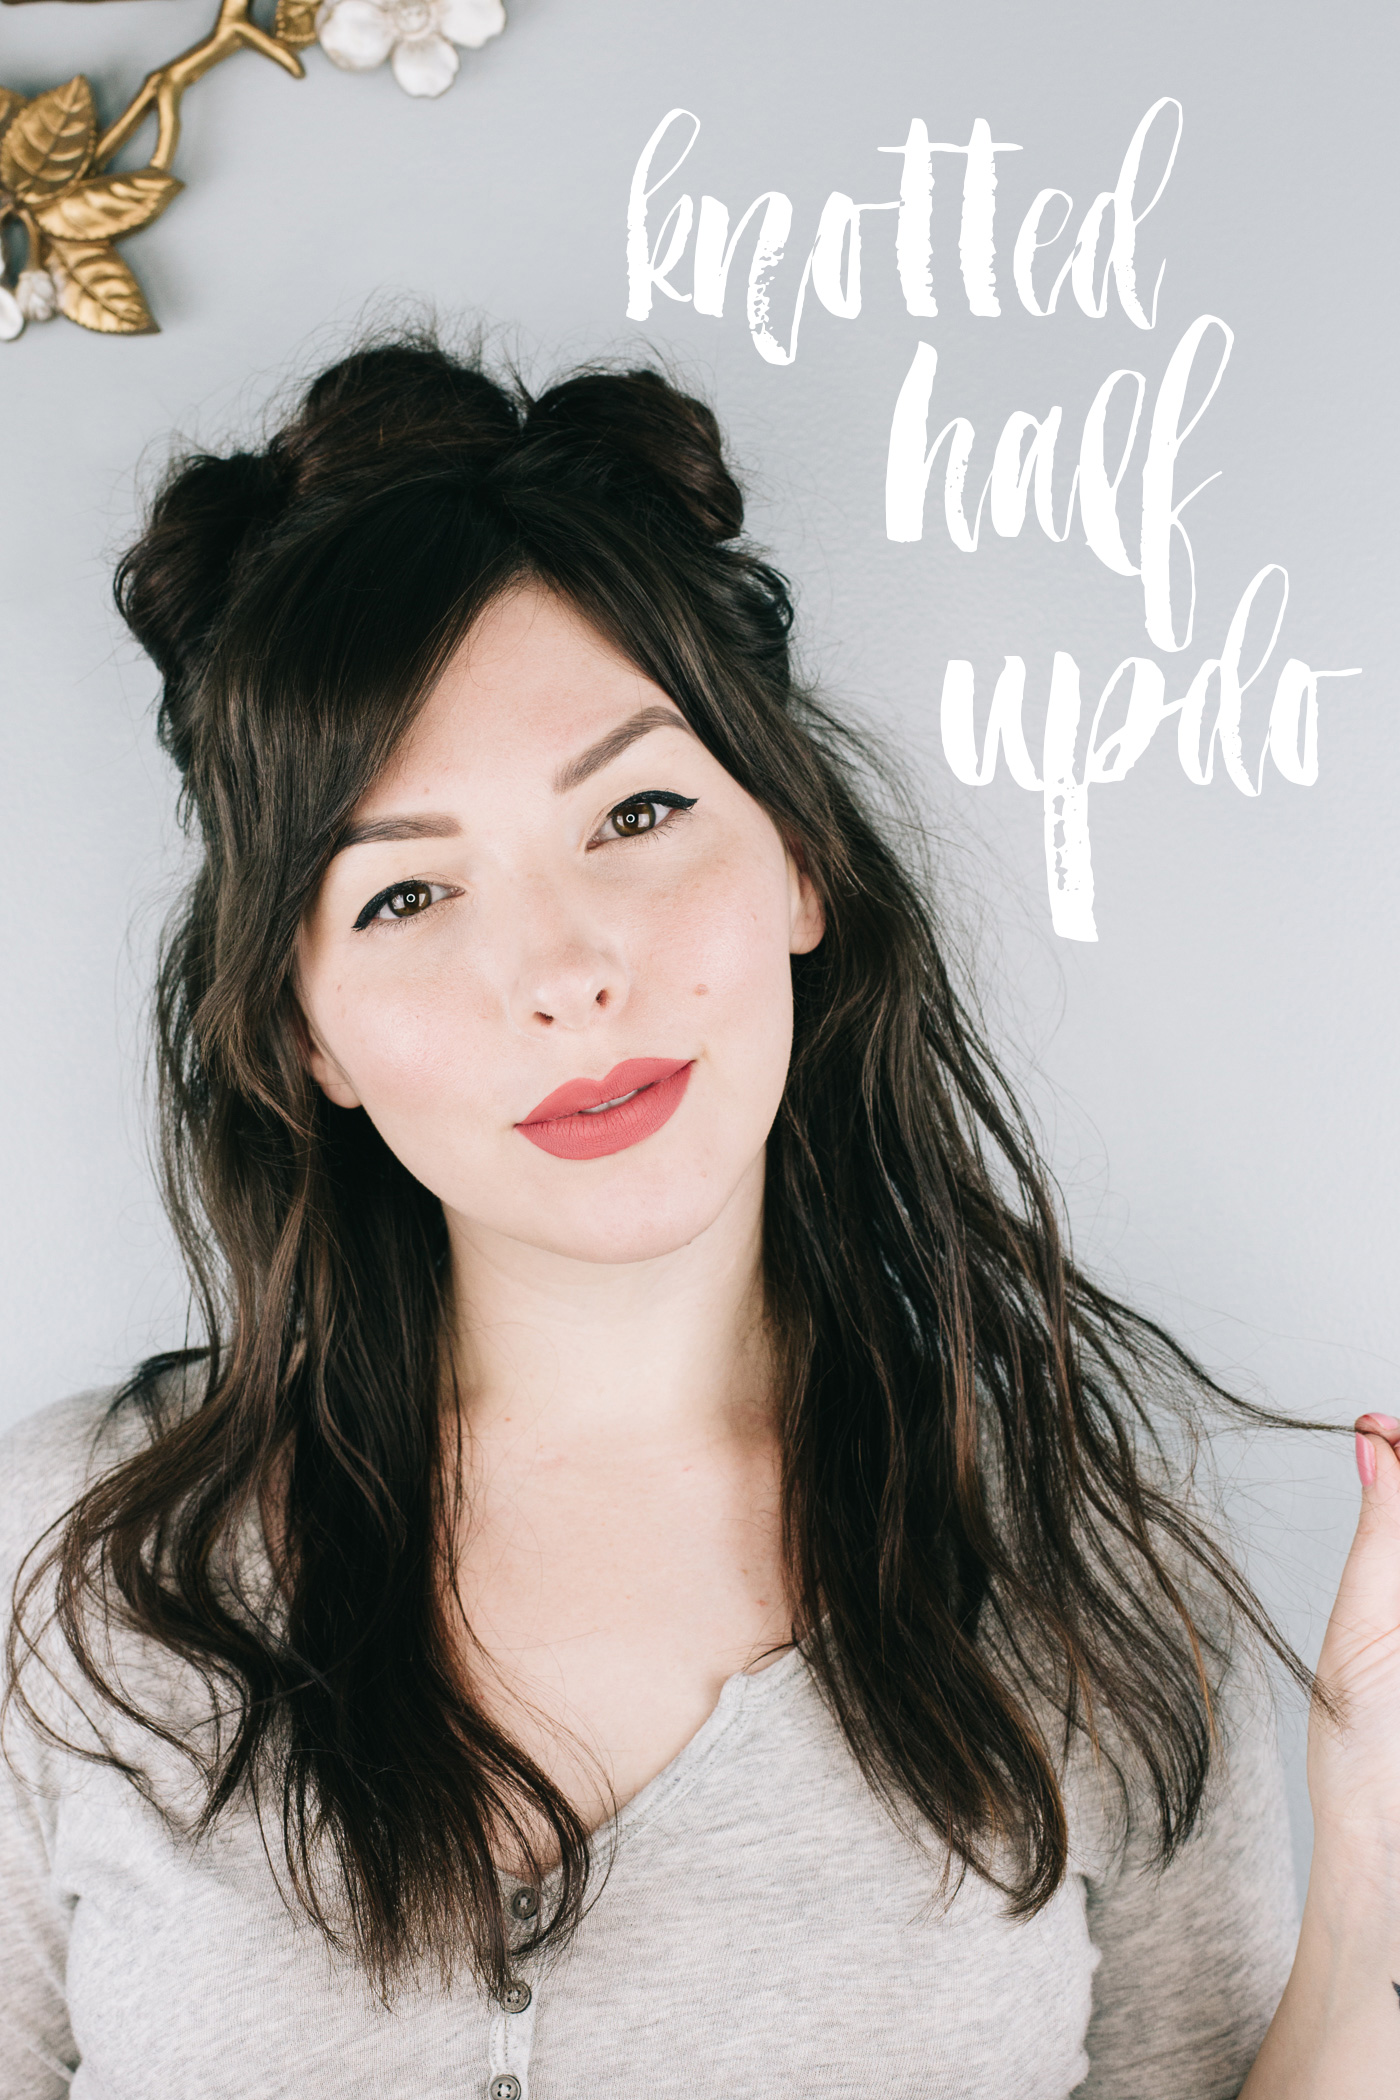 90s Style Knotted Half Updo Hair Tutorial By Keiko Lynn